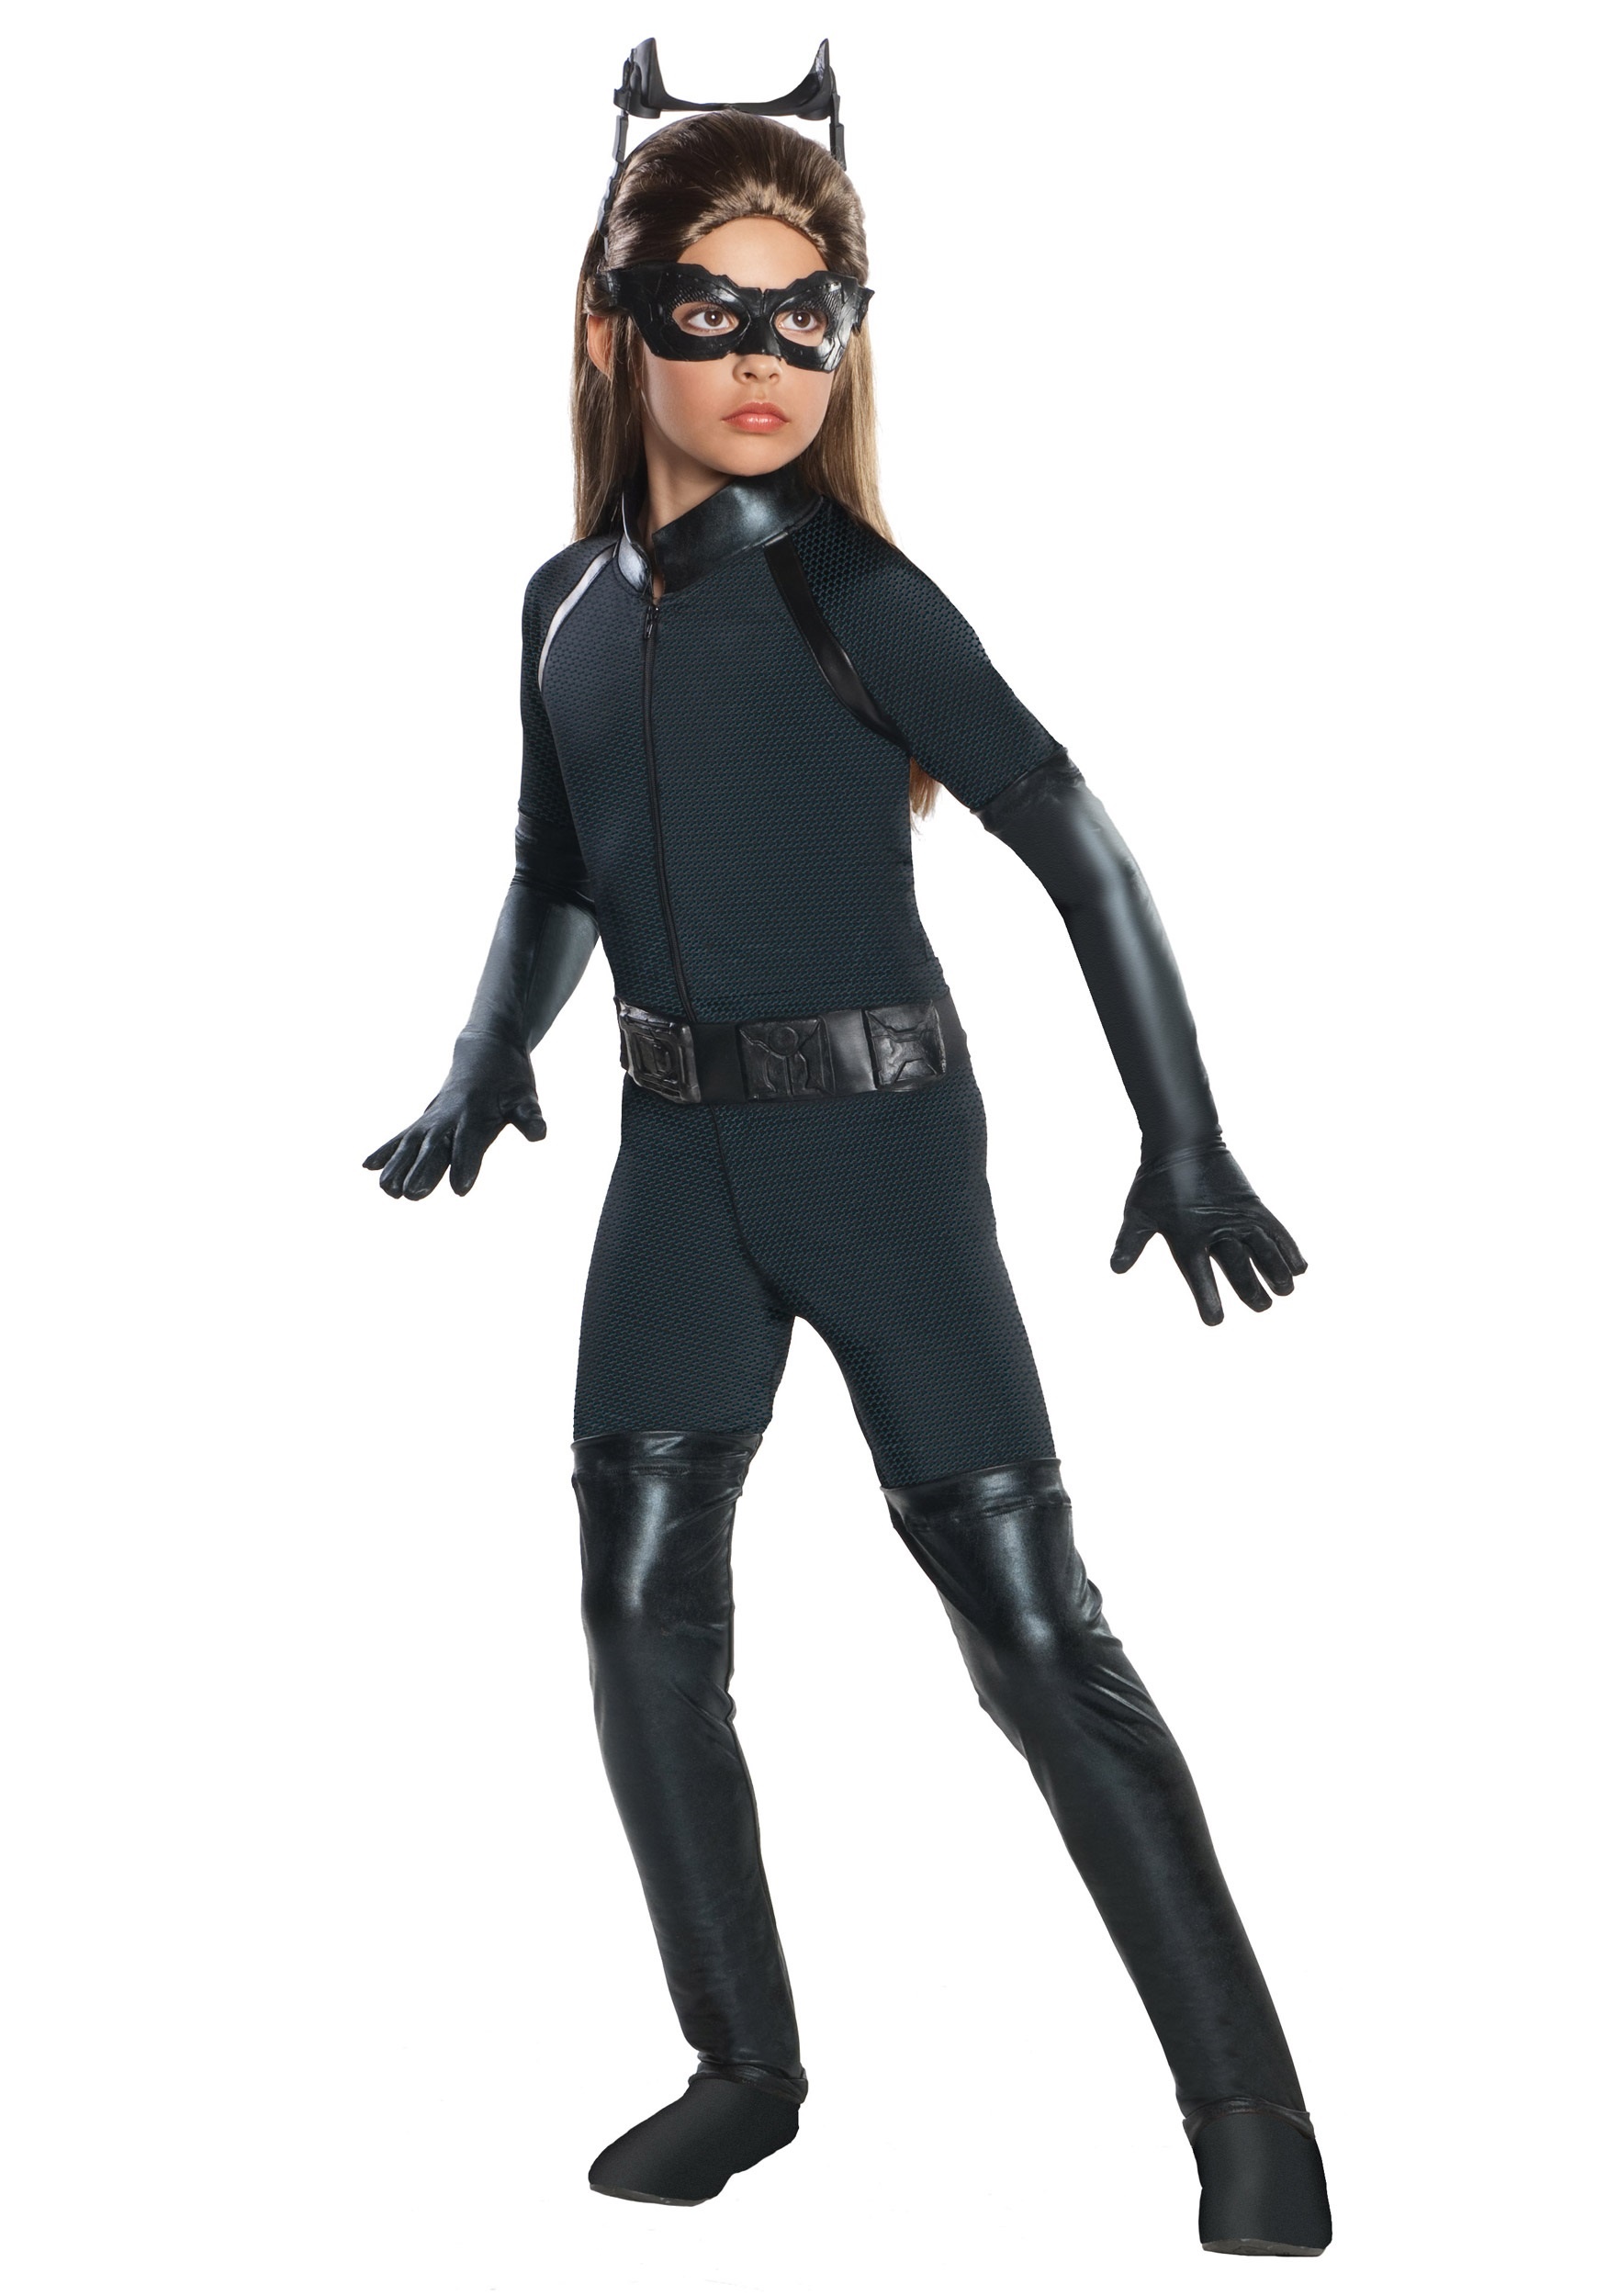 Photos - Fancy Dress Rubies Costume Co. Inc Girls Deluxe Catwoman Costume Black 